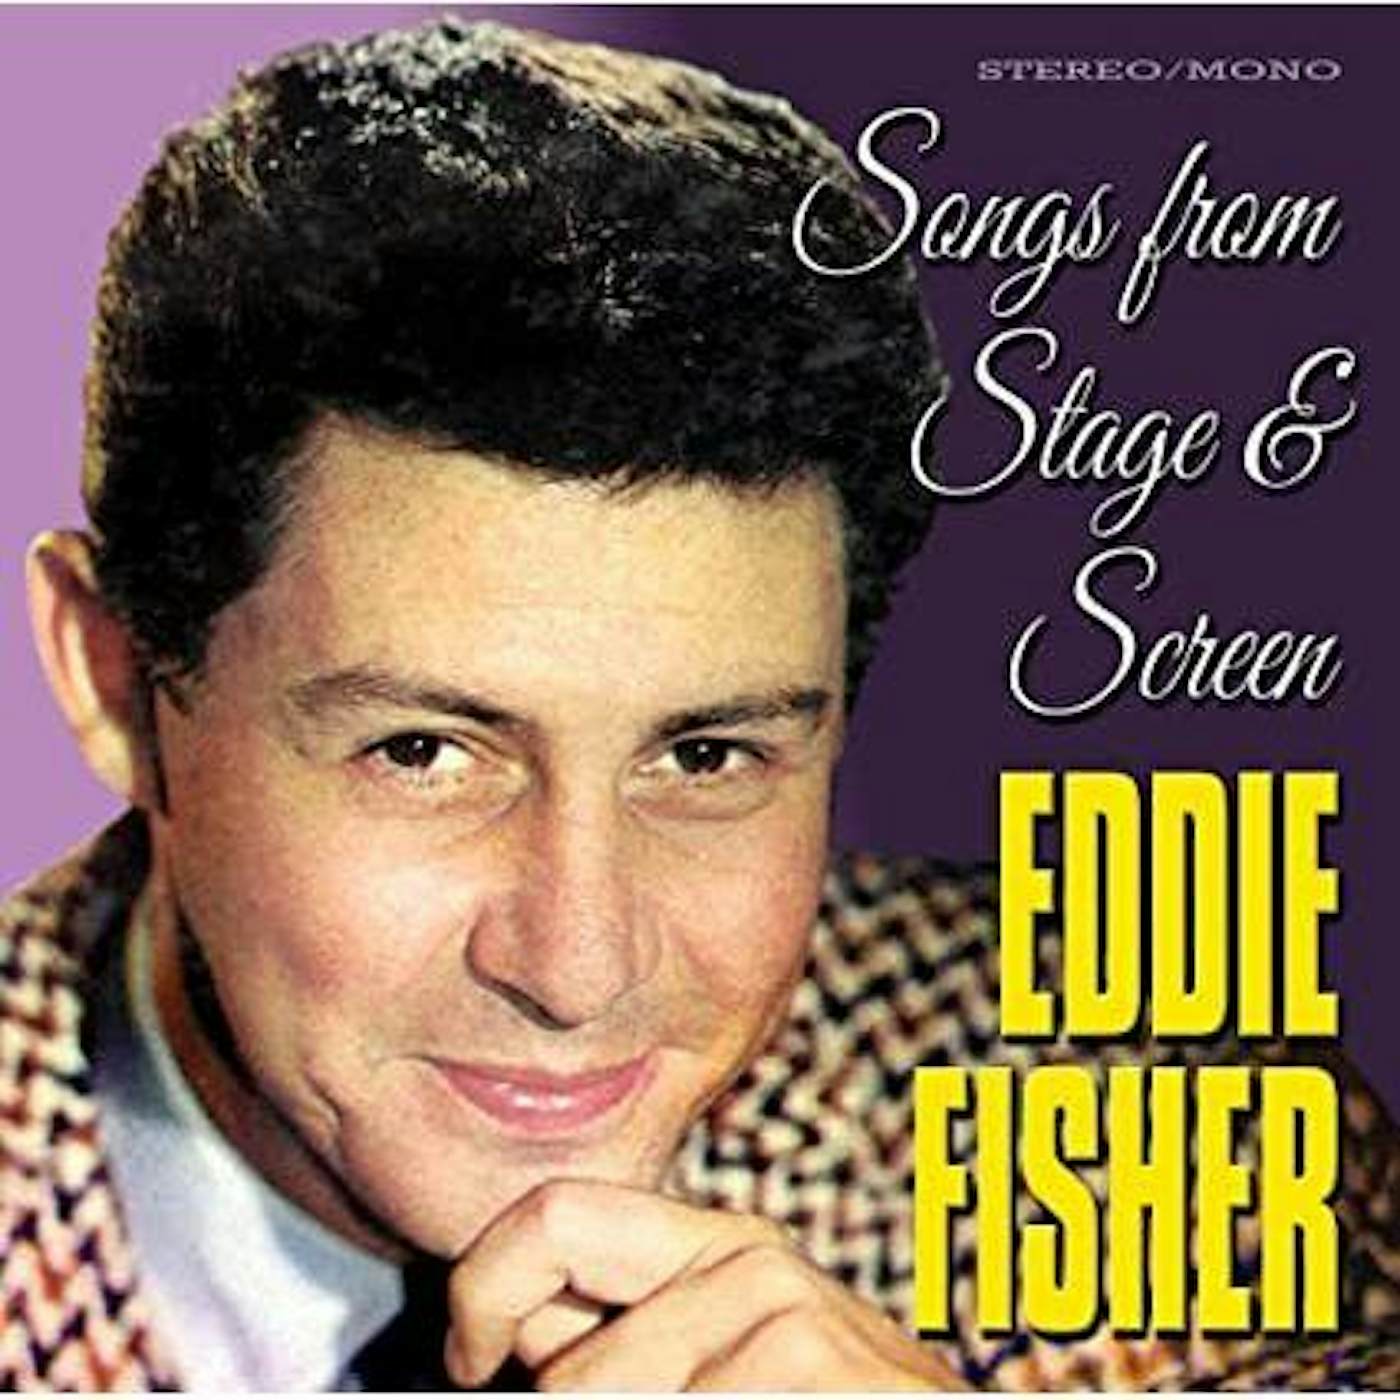 Eddie Fisher SONGS FROM STAGE & SCREEN CD